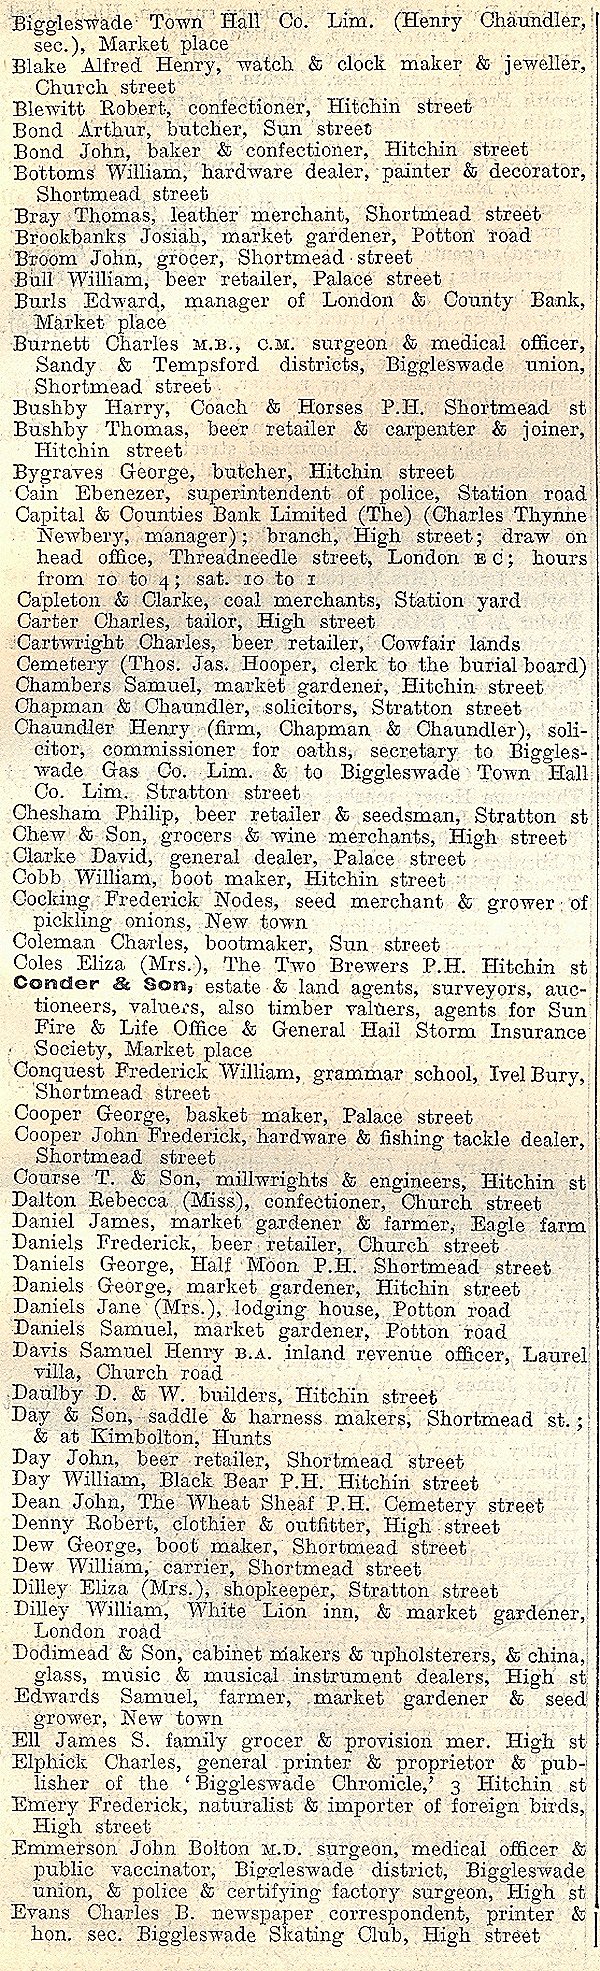 Biggleswade, from Kellys Directory 1894, page 51, enlarged text